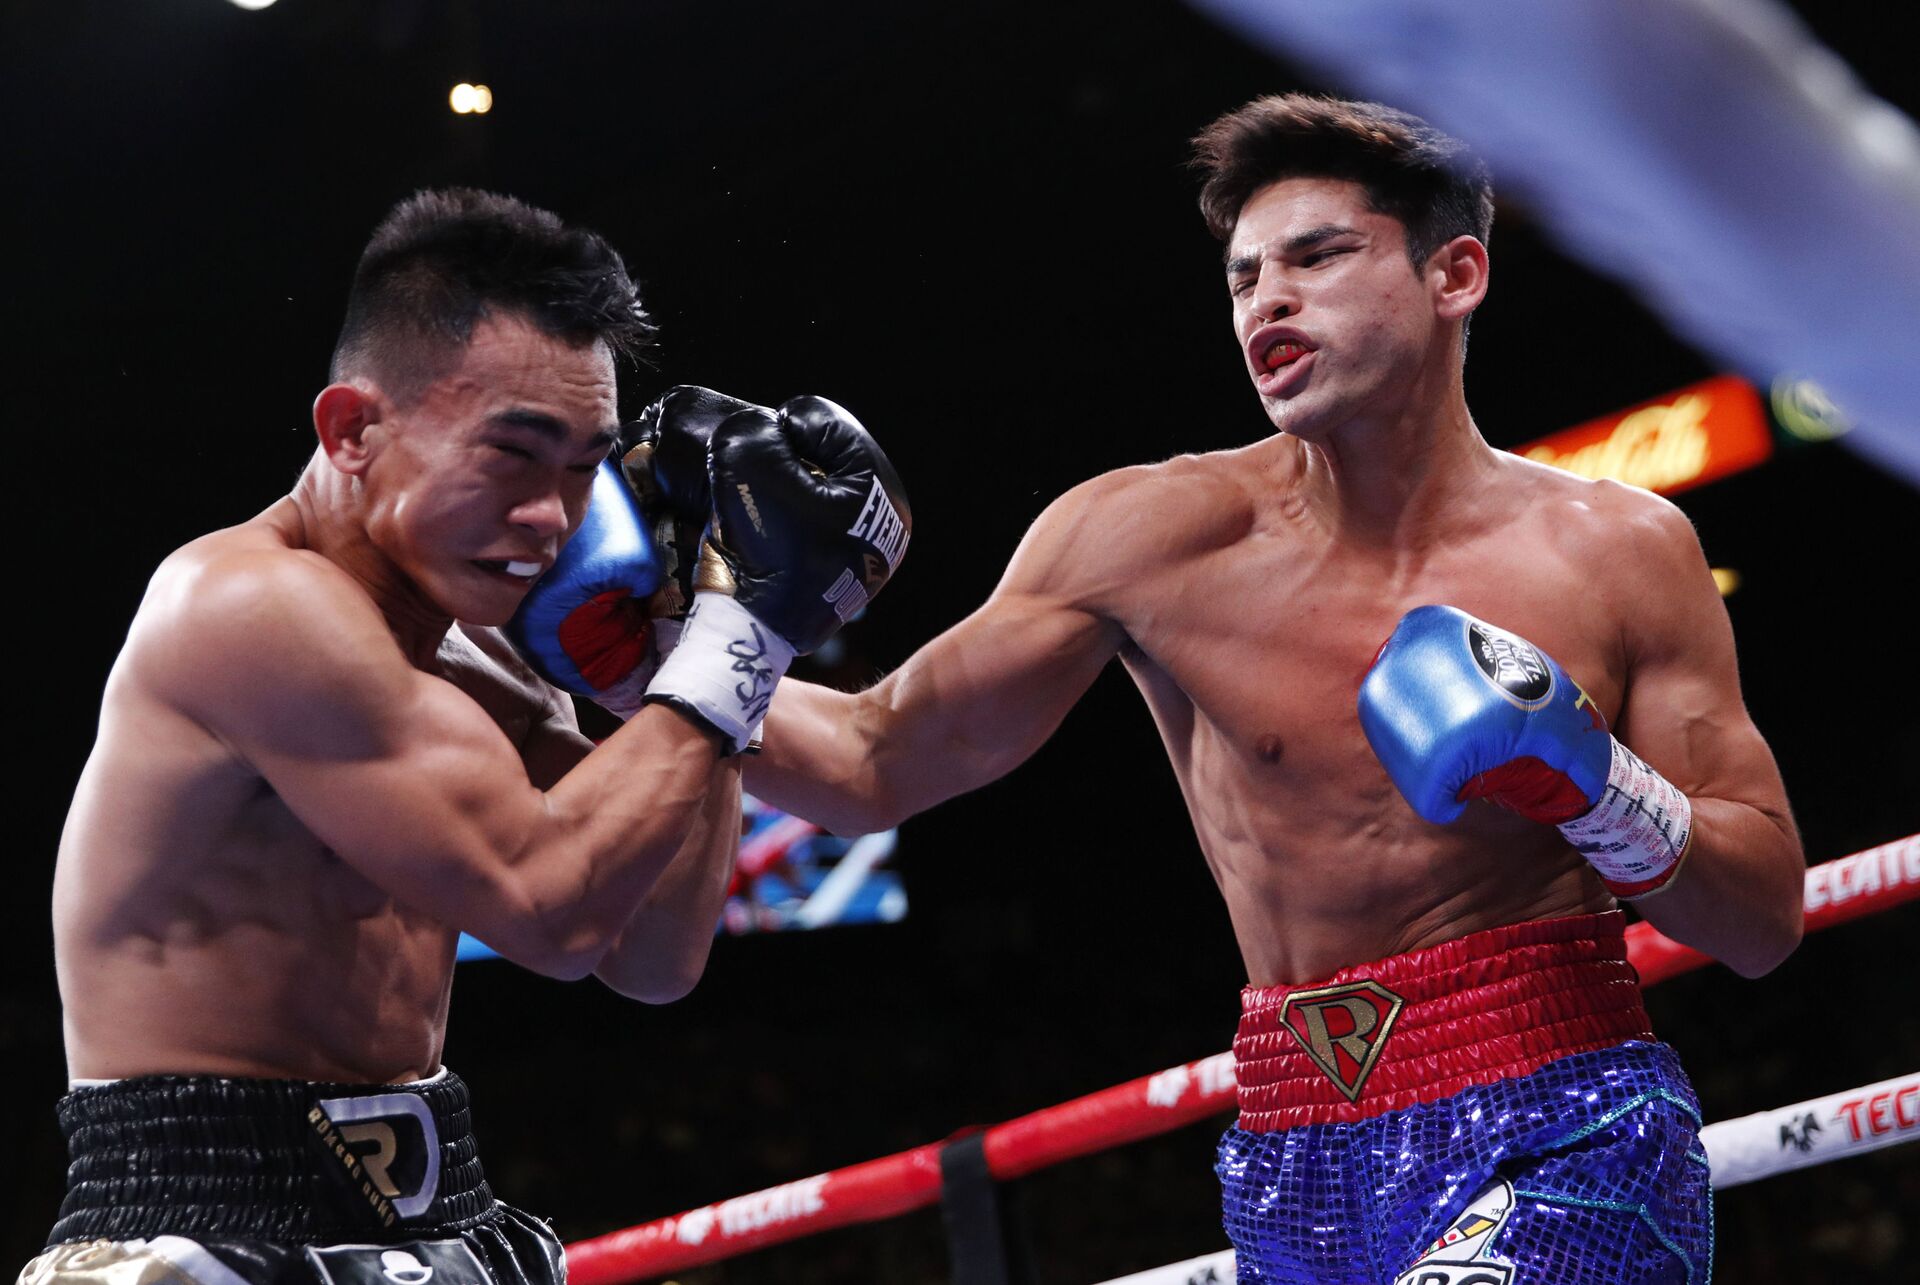 Who is Ryan Garcia? Social Media Star Could Bring New Fans to Boxing By Fighting Veteran Pacquiao - Sputnik International, 1920, 16.02.2021